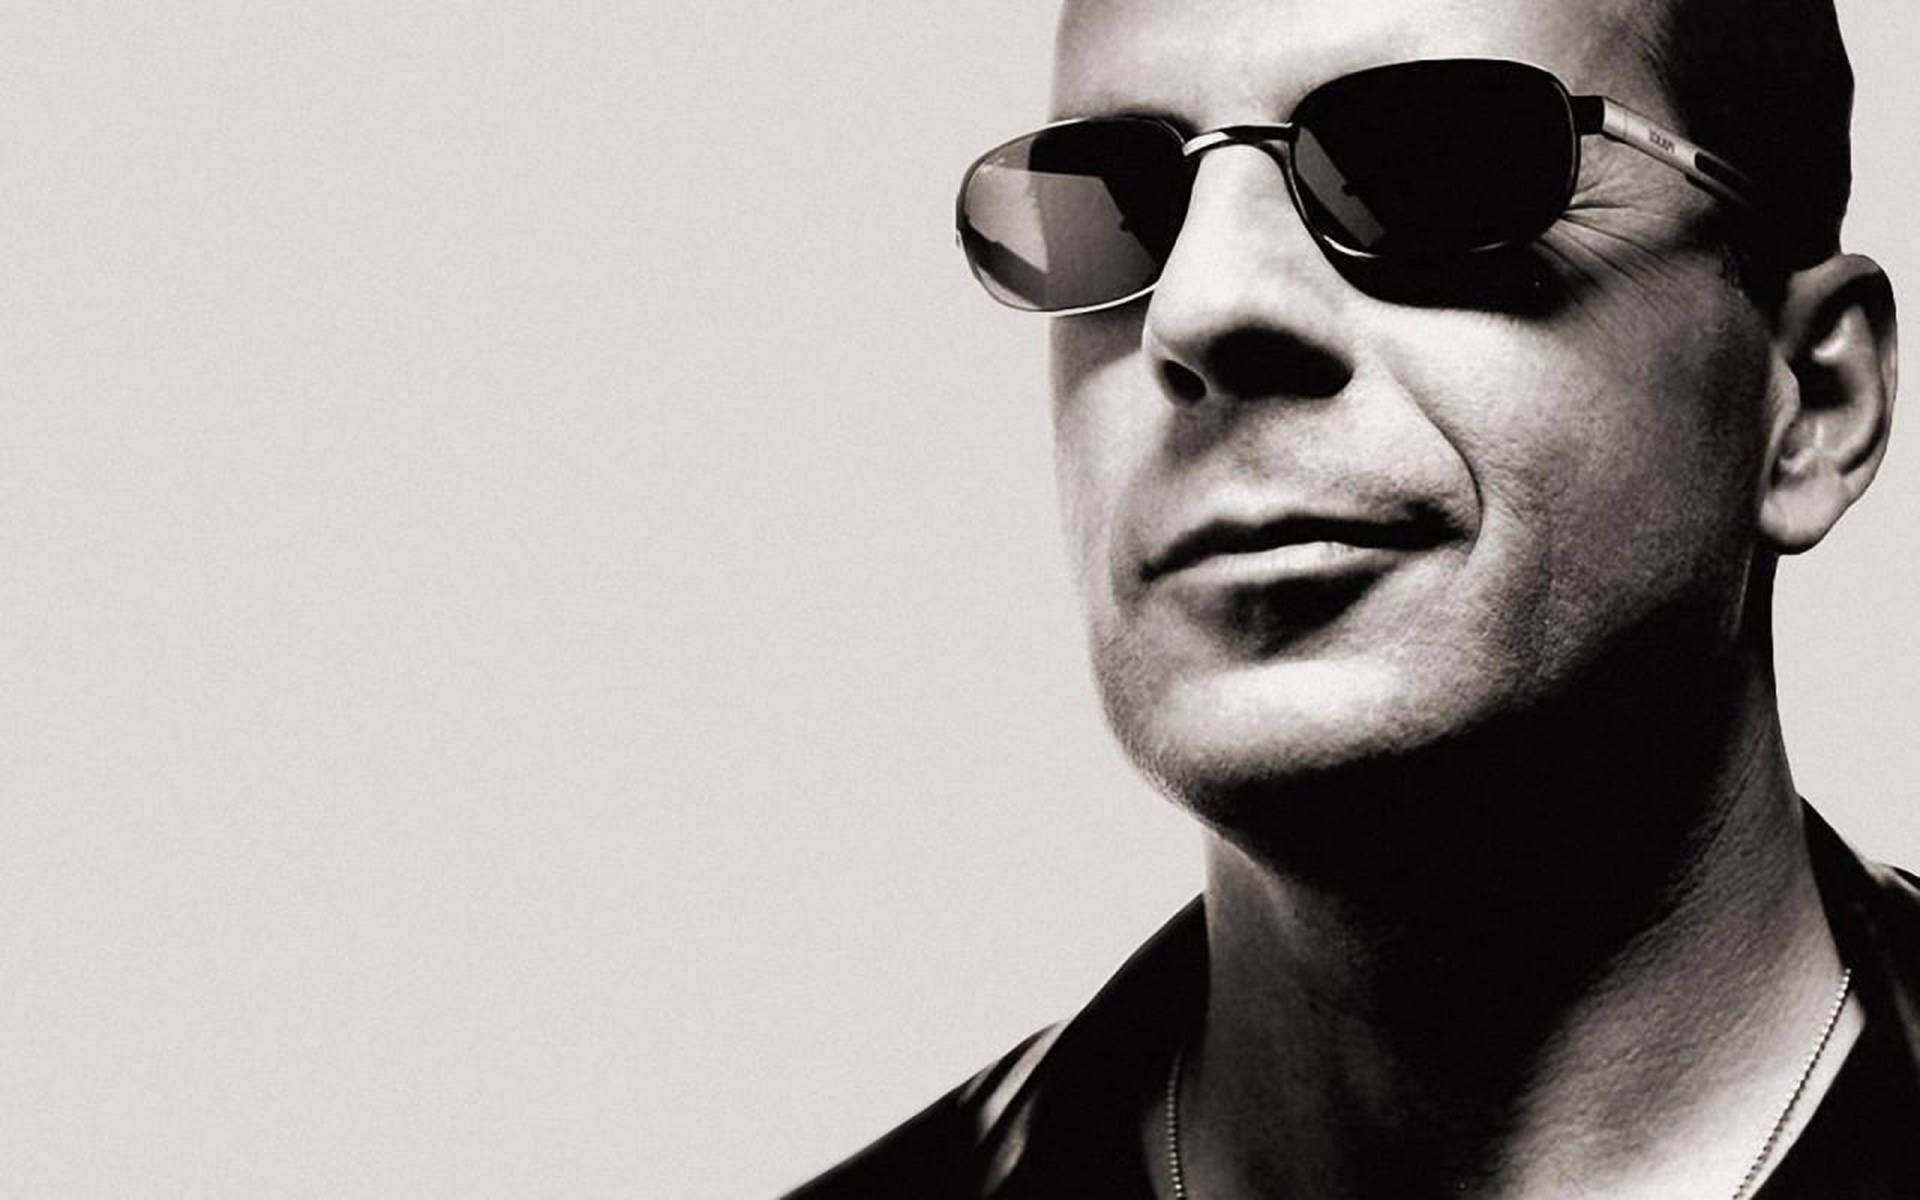 Hollywood Action Star Bruce Willis In Sunglasses Background